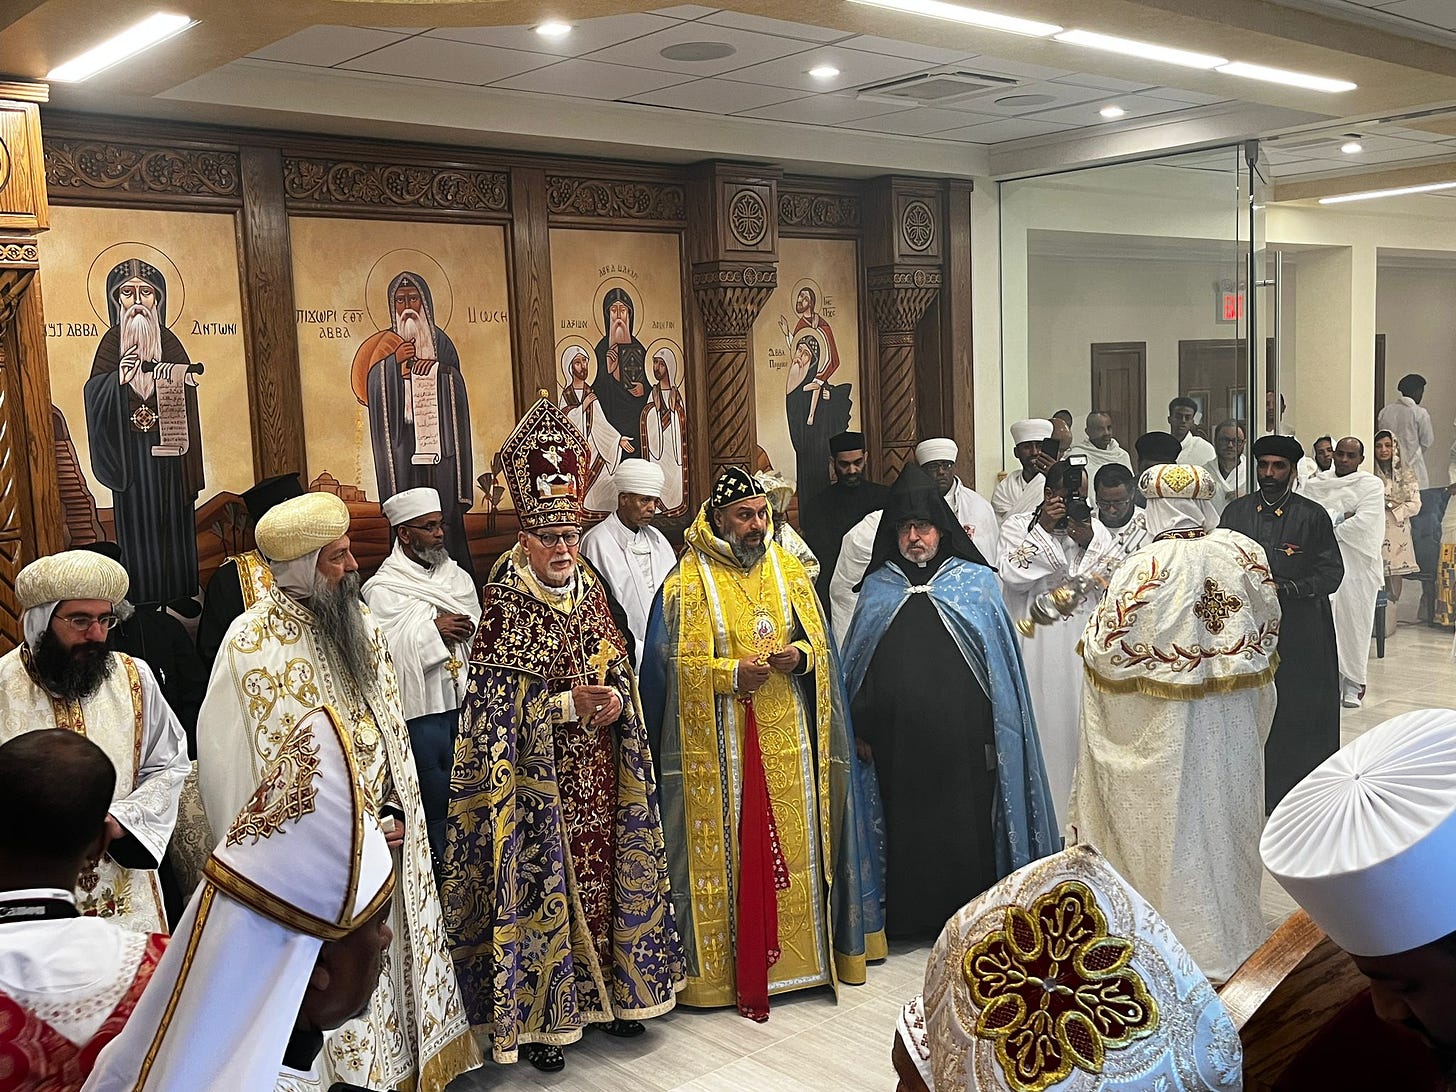 A concelebrated liturgy of the Standing Council of the Oriental Orthodox Church